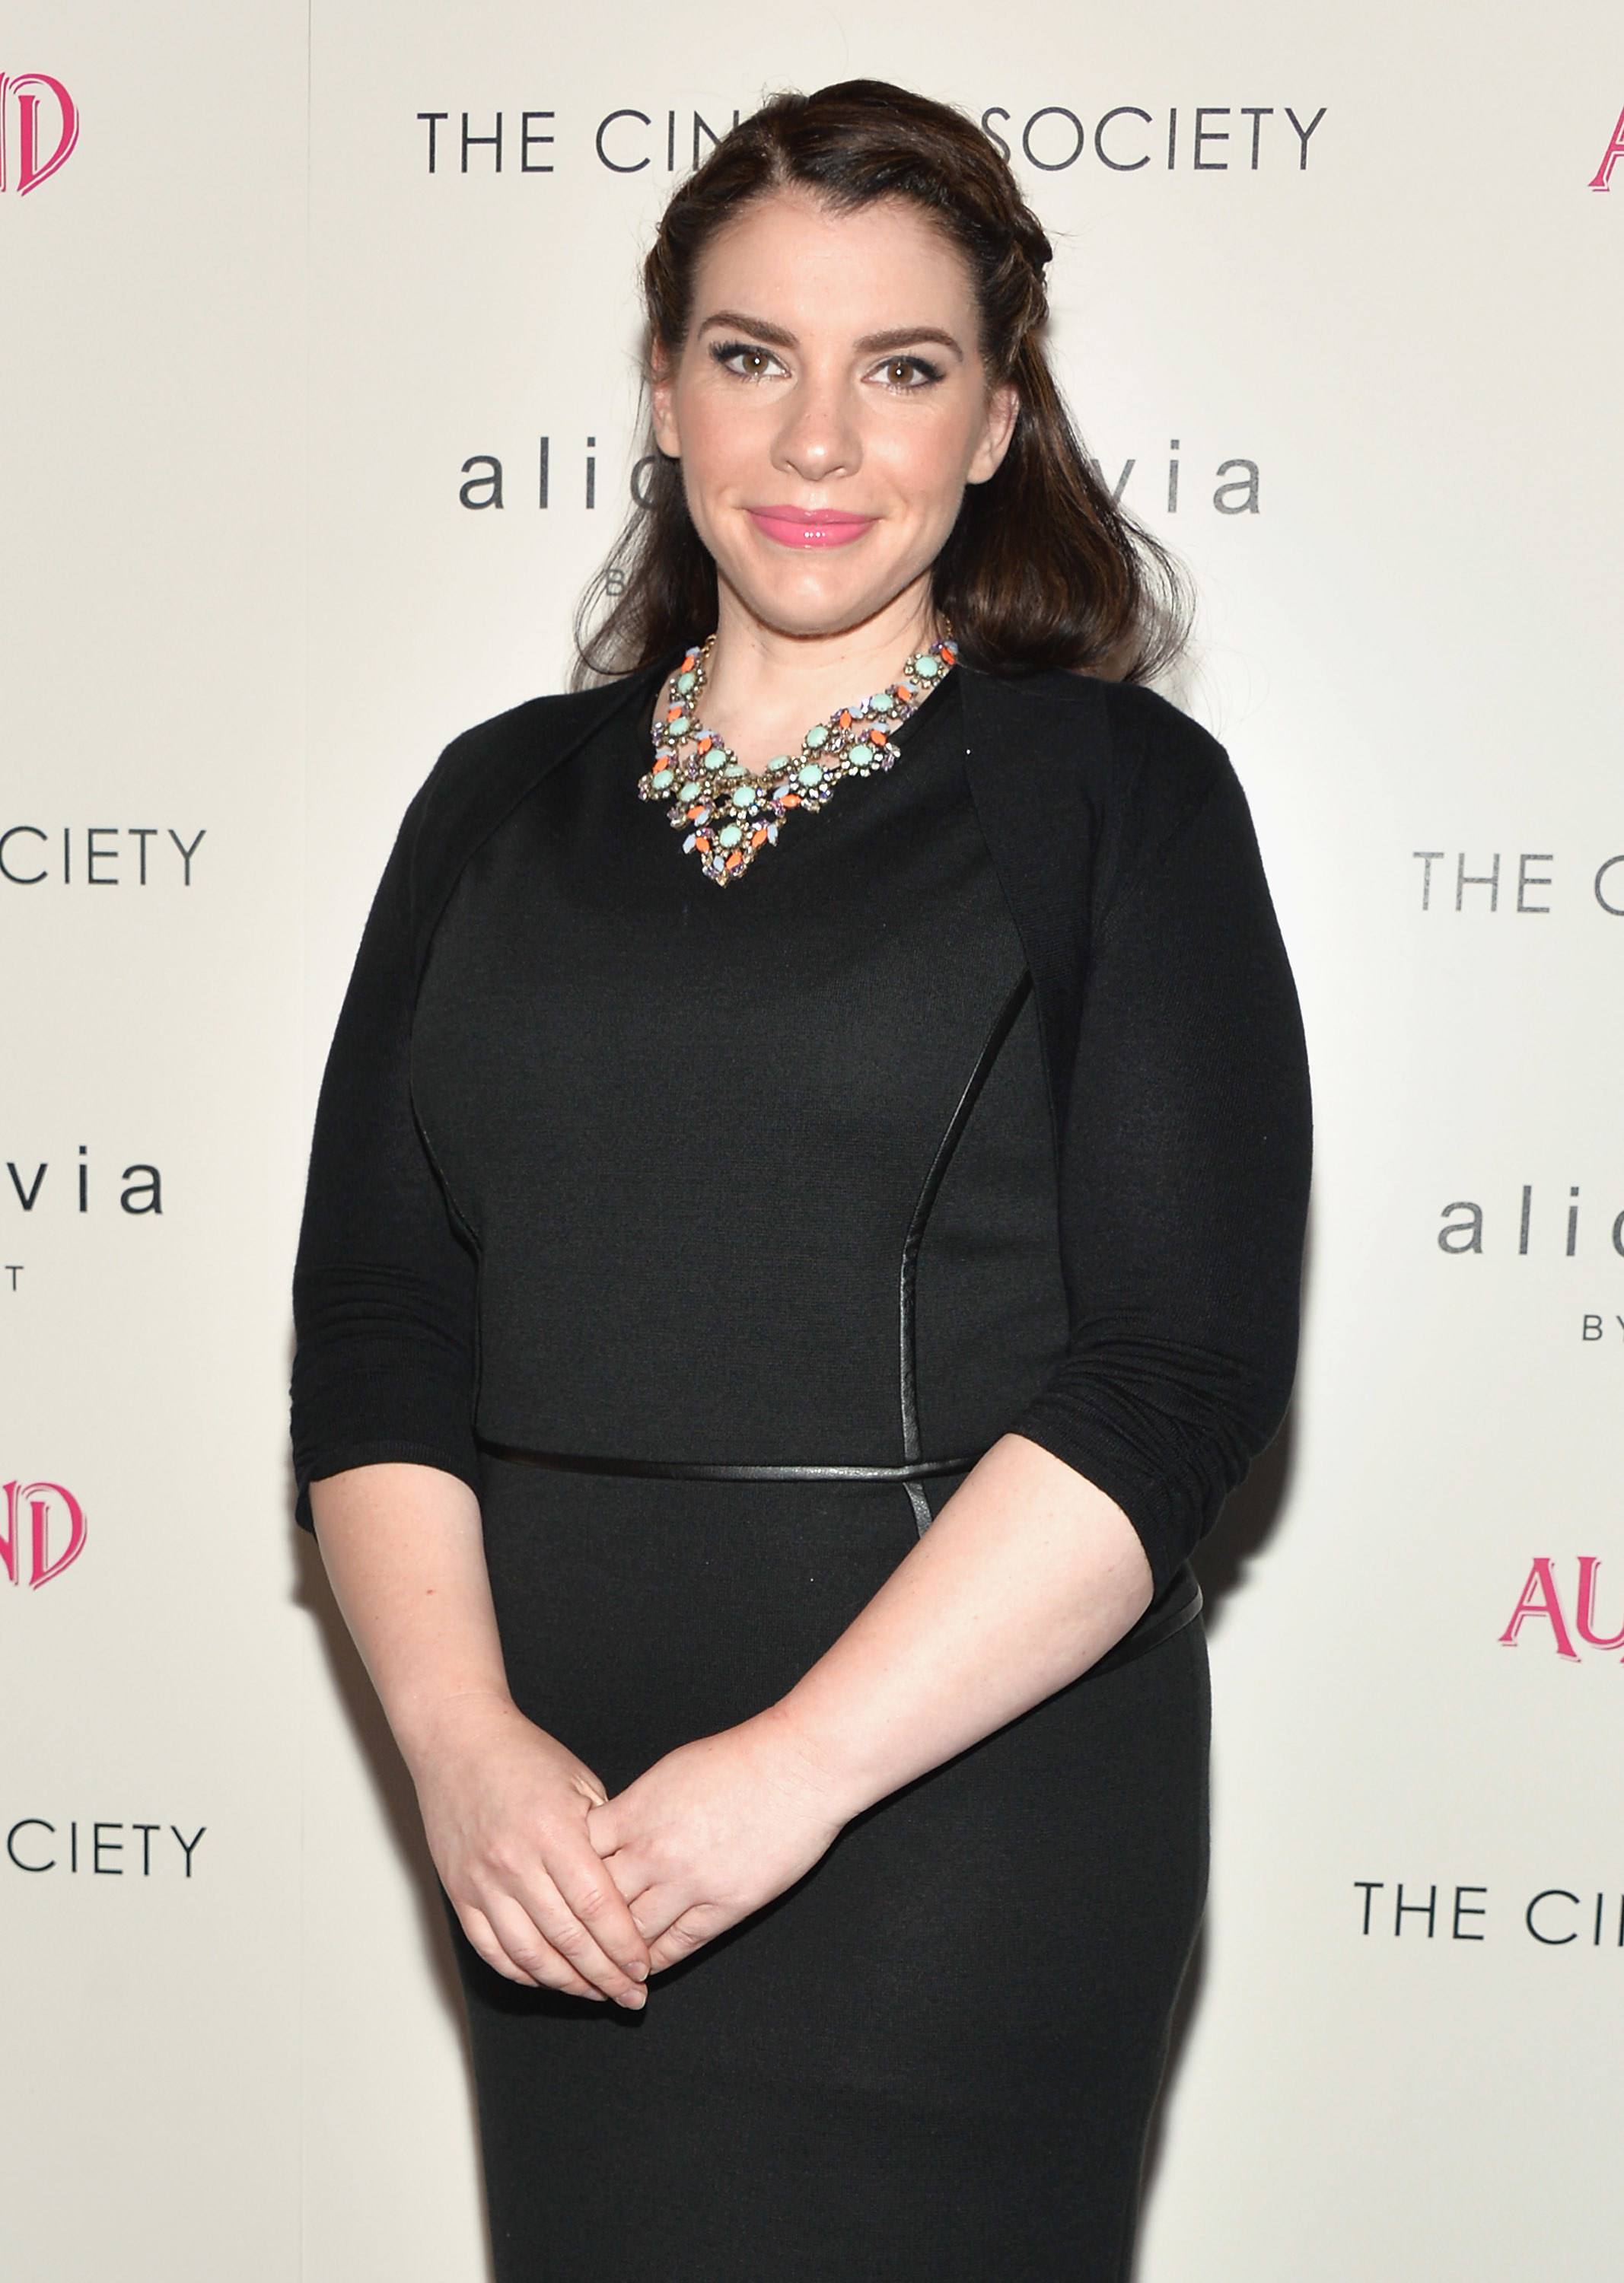 Stephenie Meyer is the best-selling author